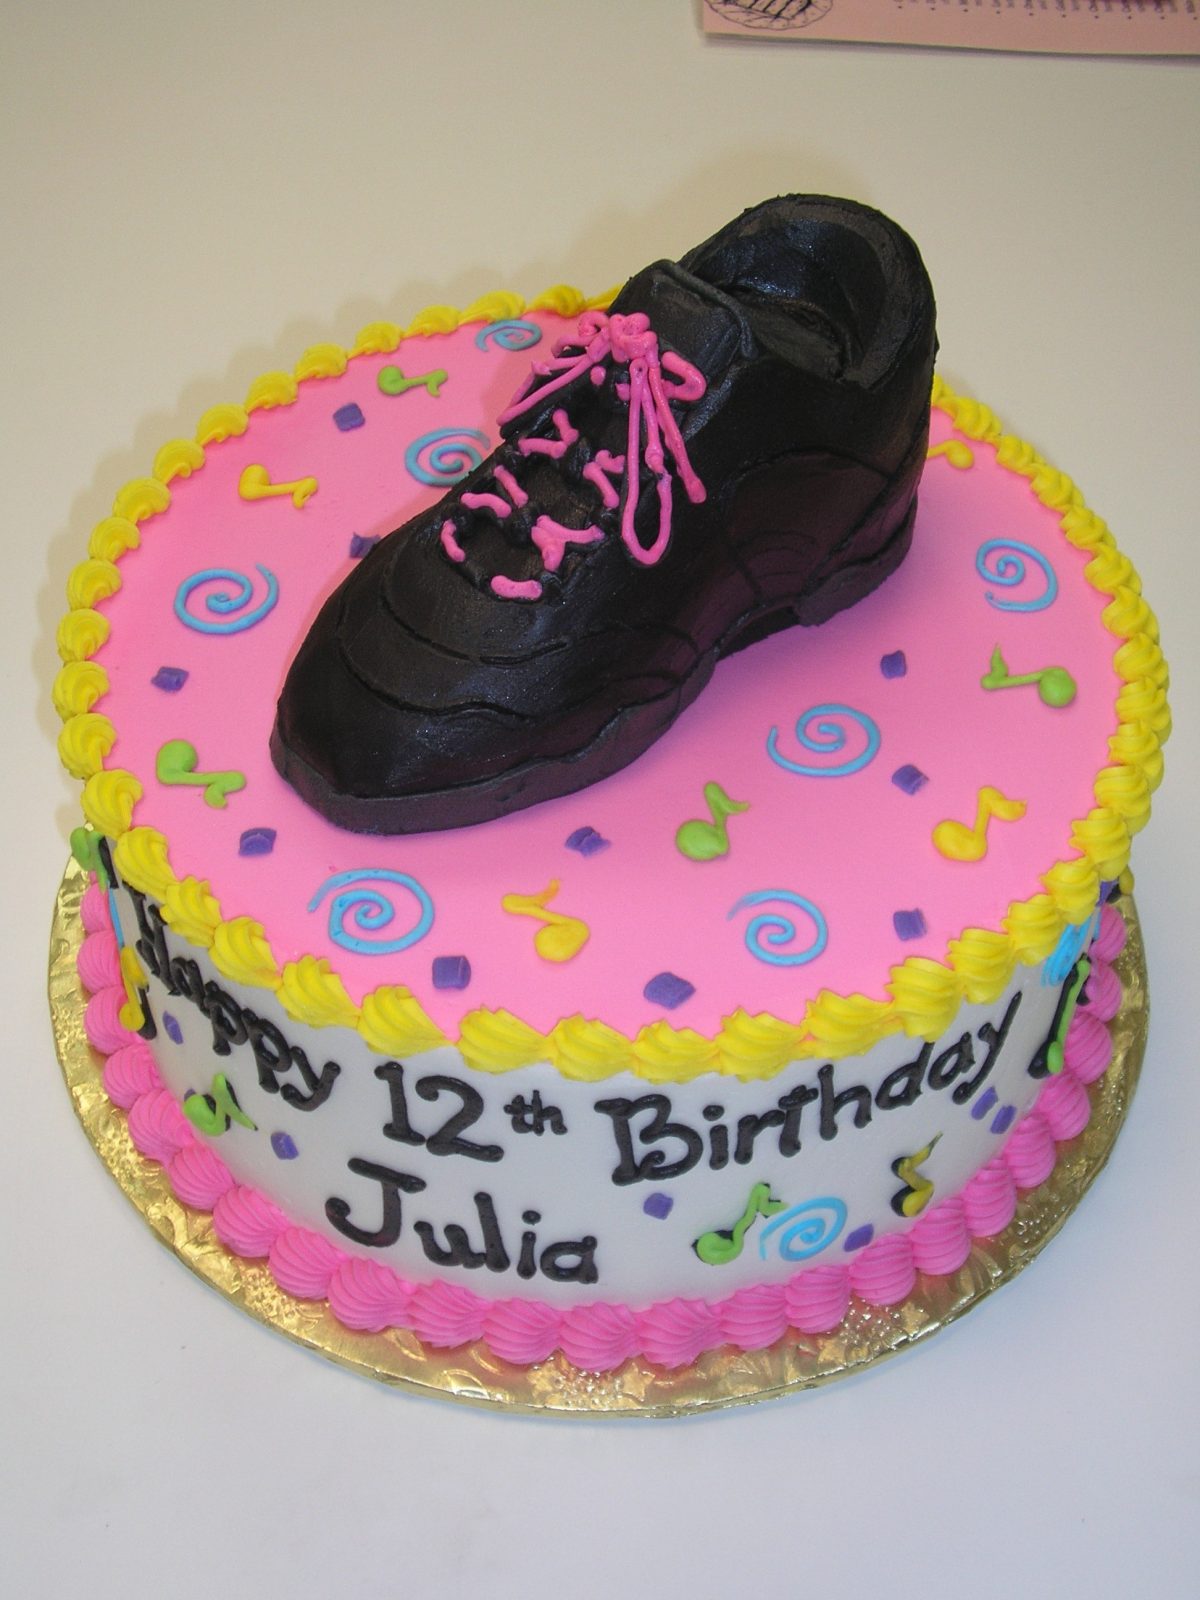 Jazz shoes cake, jazz shoes with musical notes cake